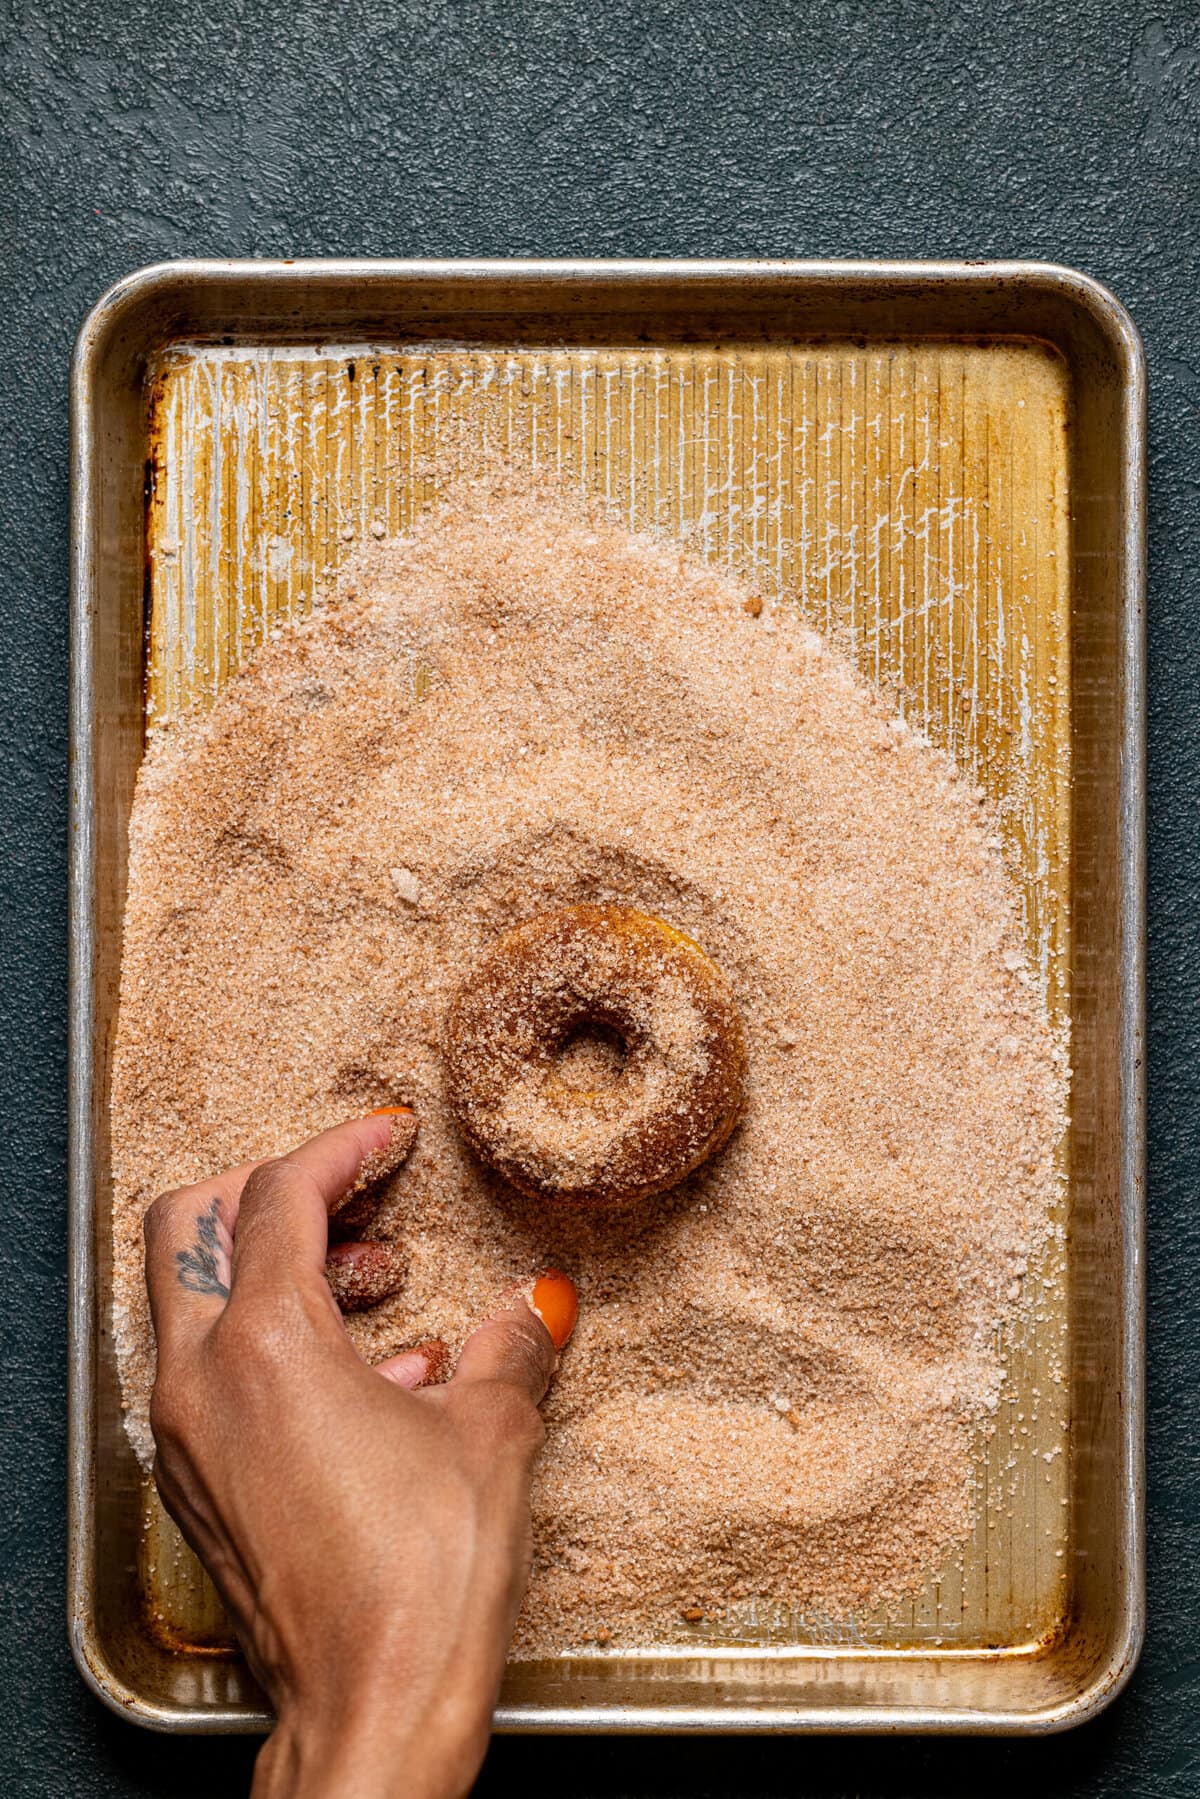 Donut being dusted with sugar on a baking sheet.